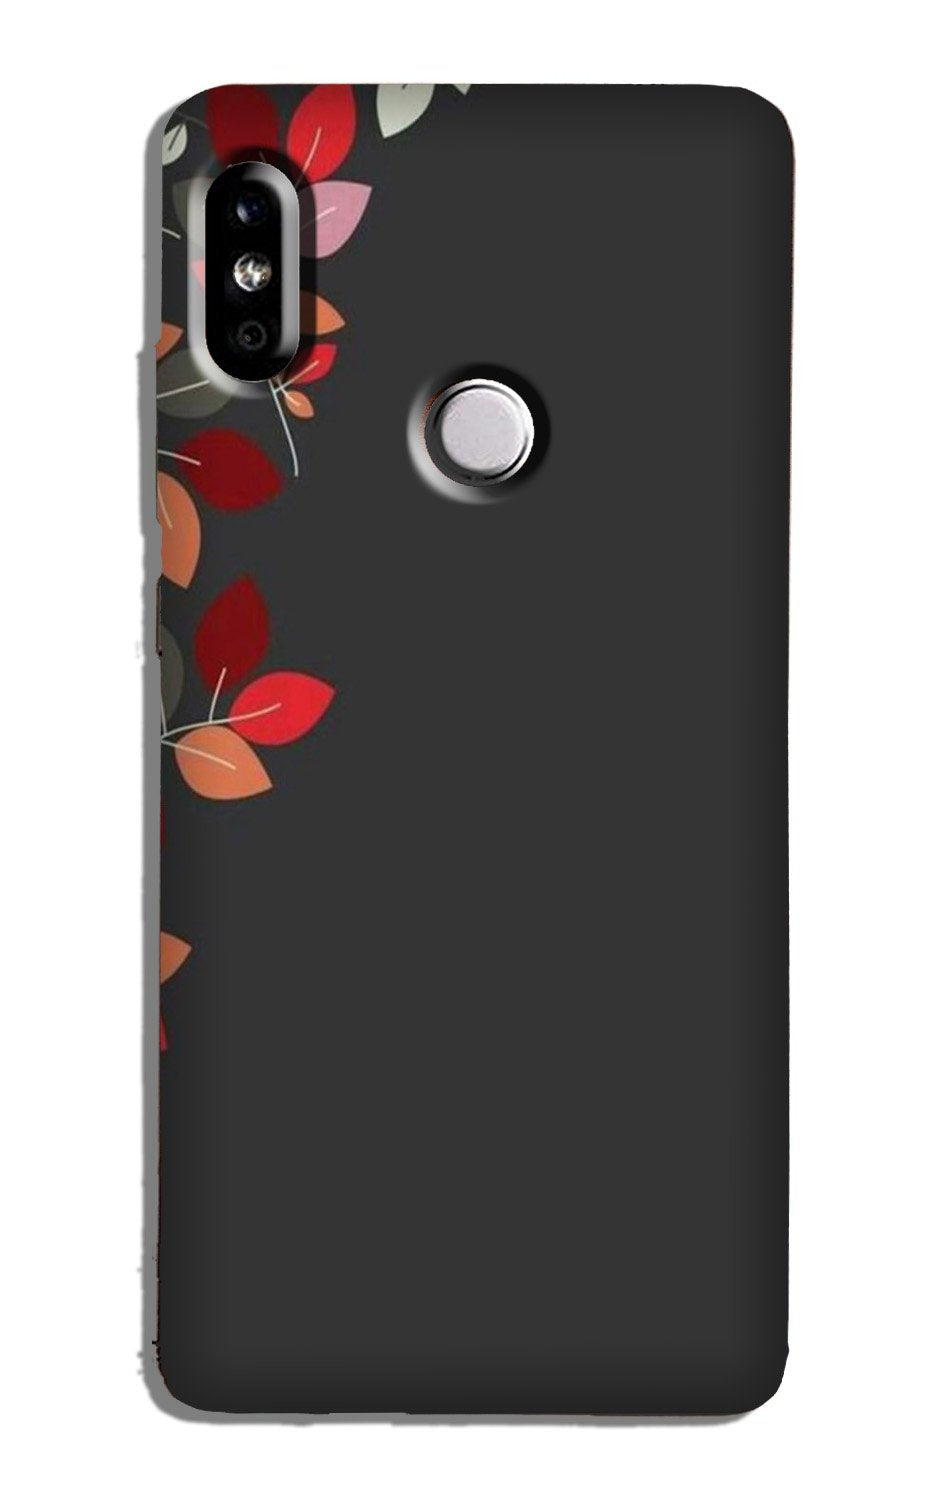 Grey Background Case for Redmi Note 5 Pro